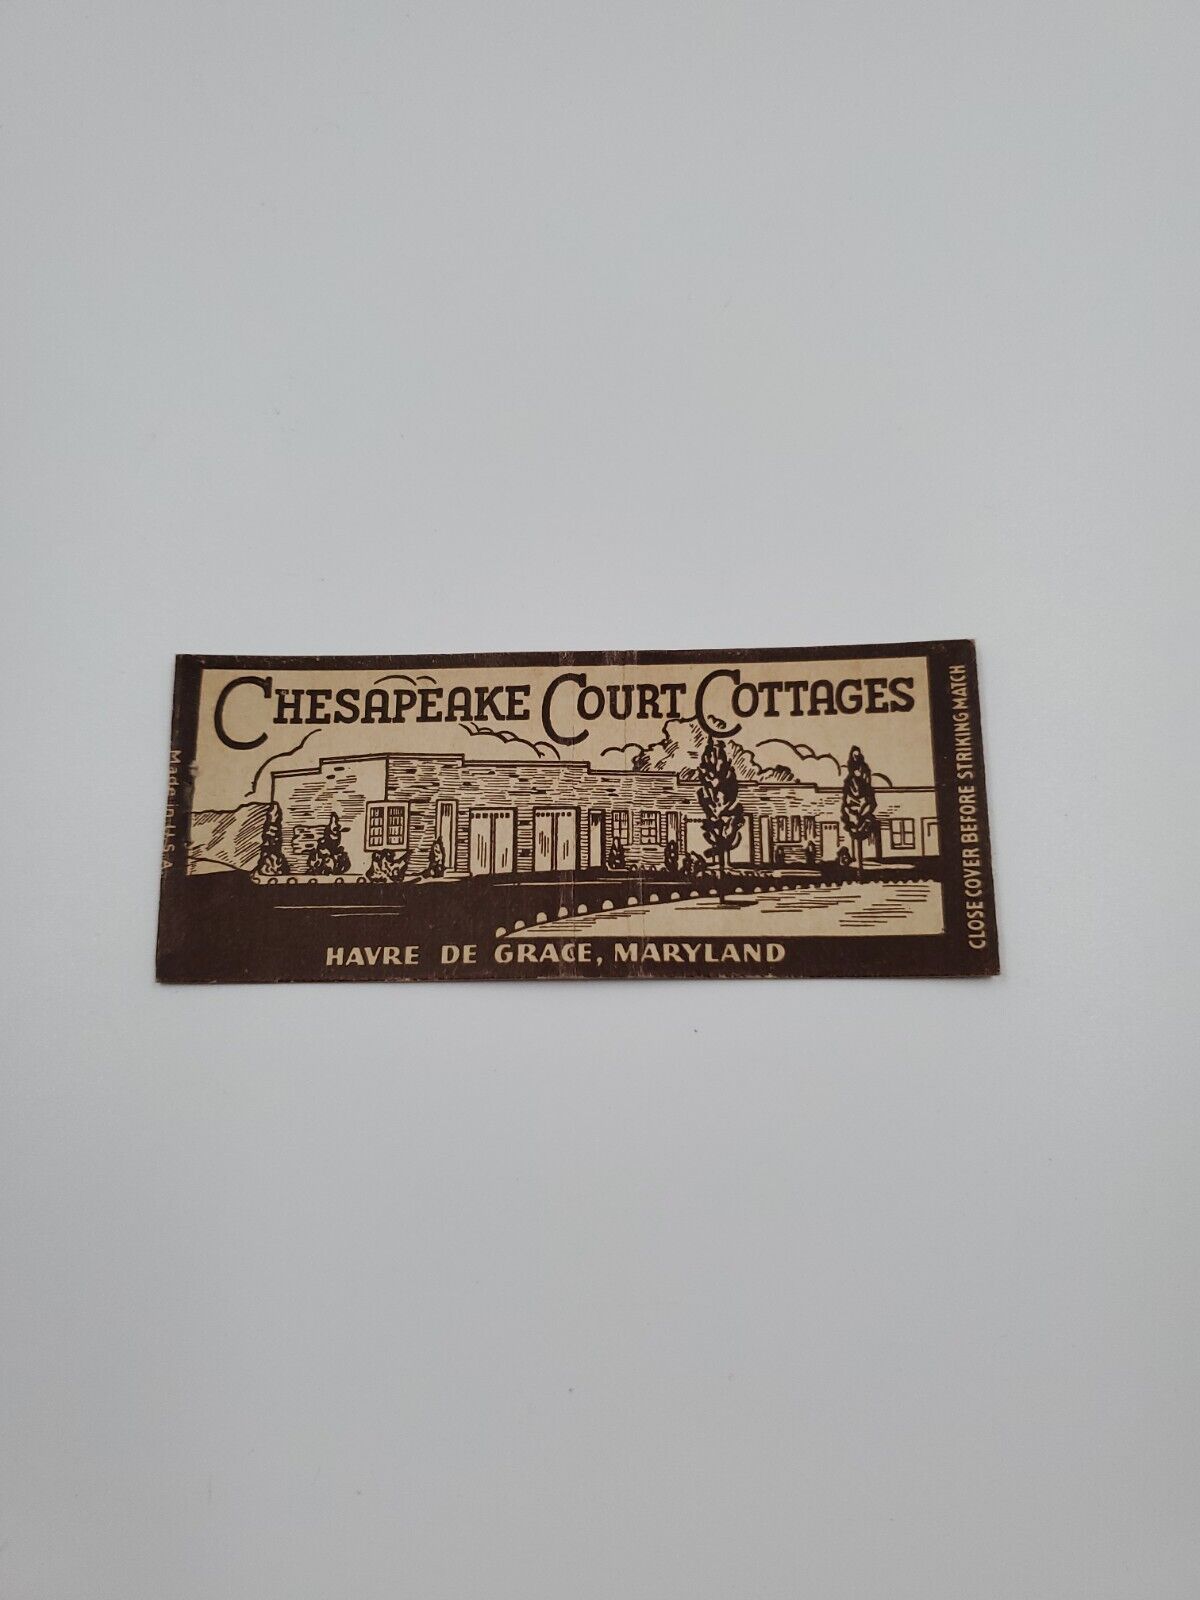 Chesapeake Court Cottages Havre De Grace Maryland Full Cover Matchbook Cover